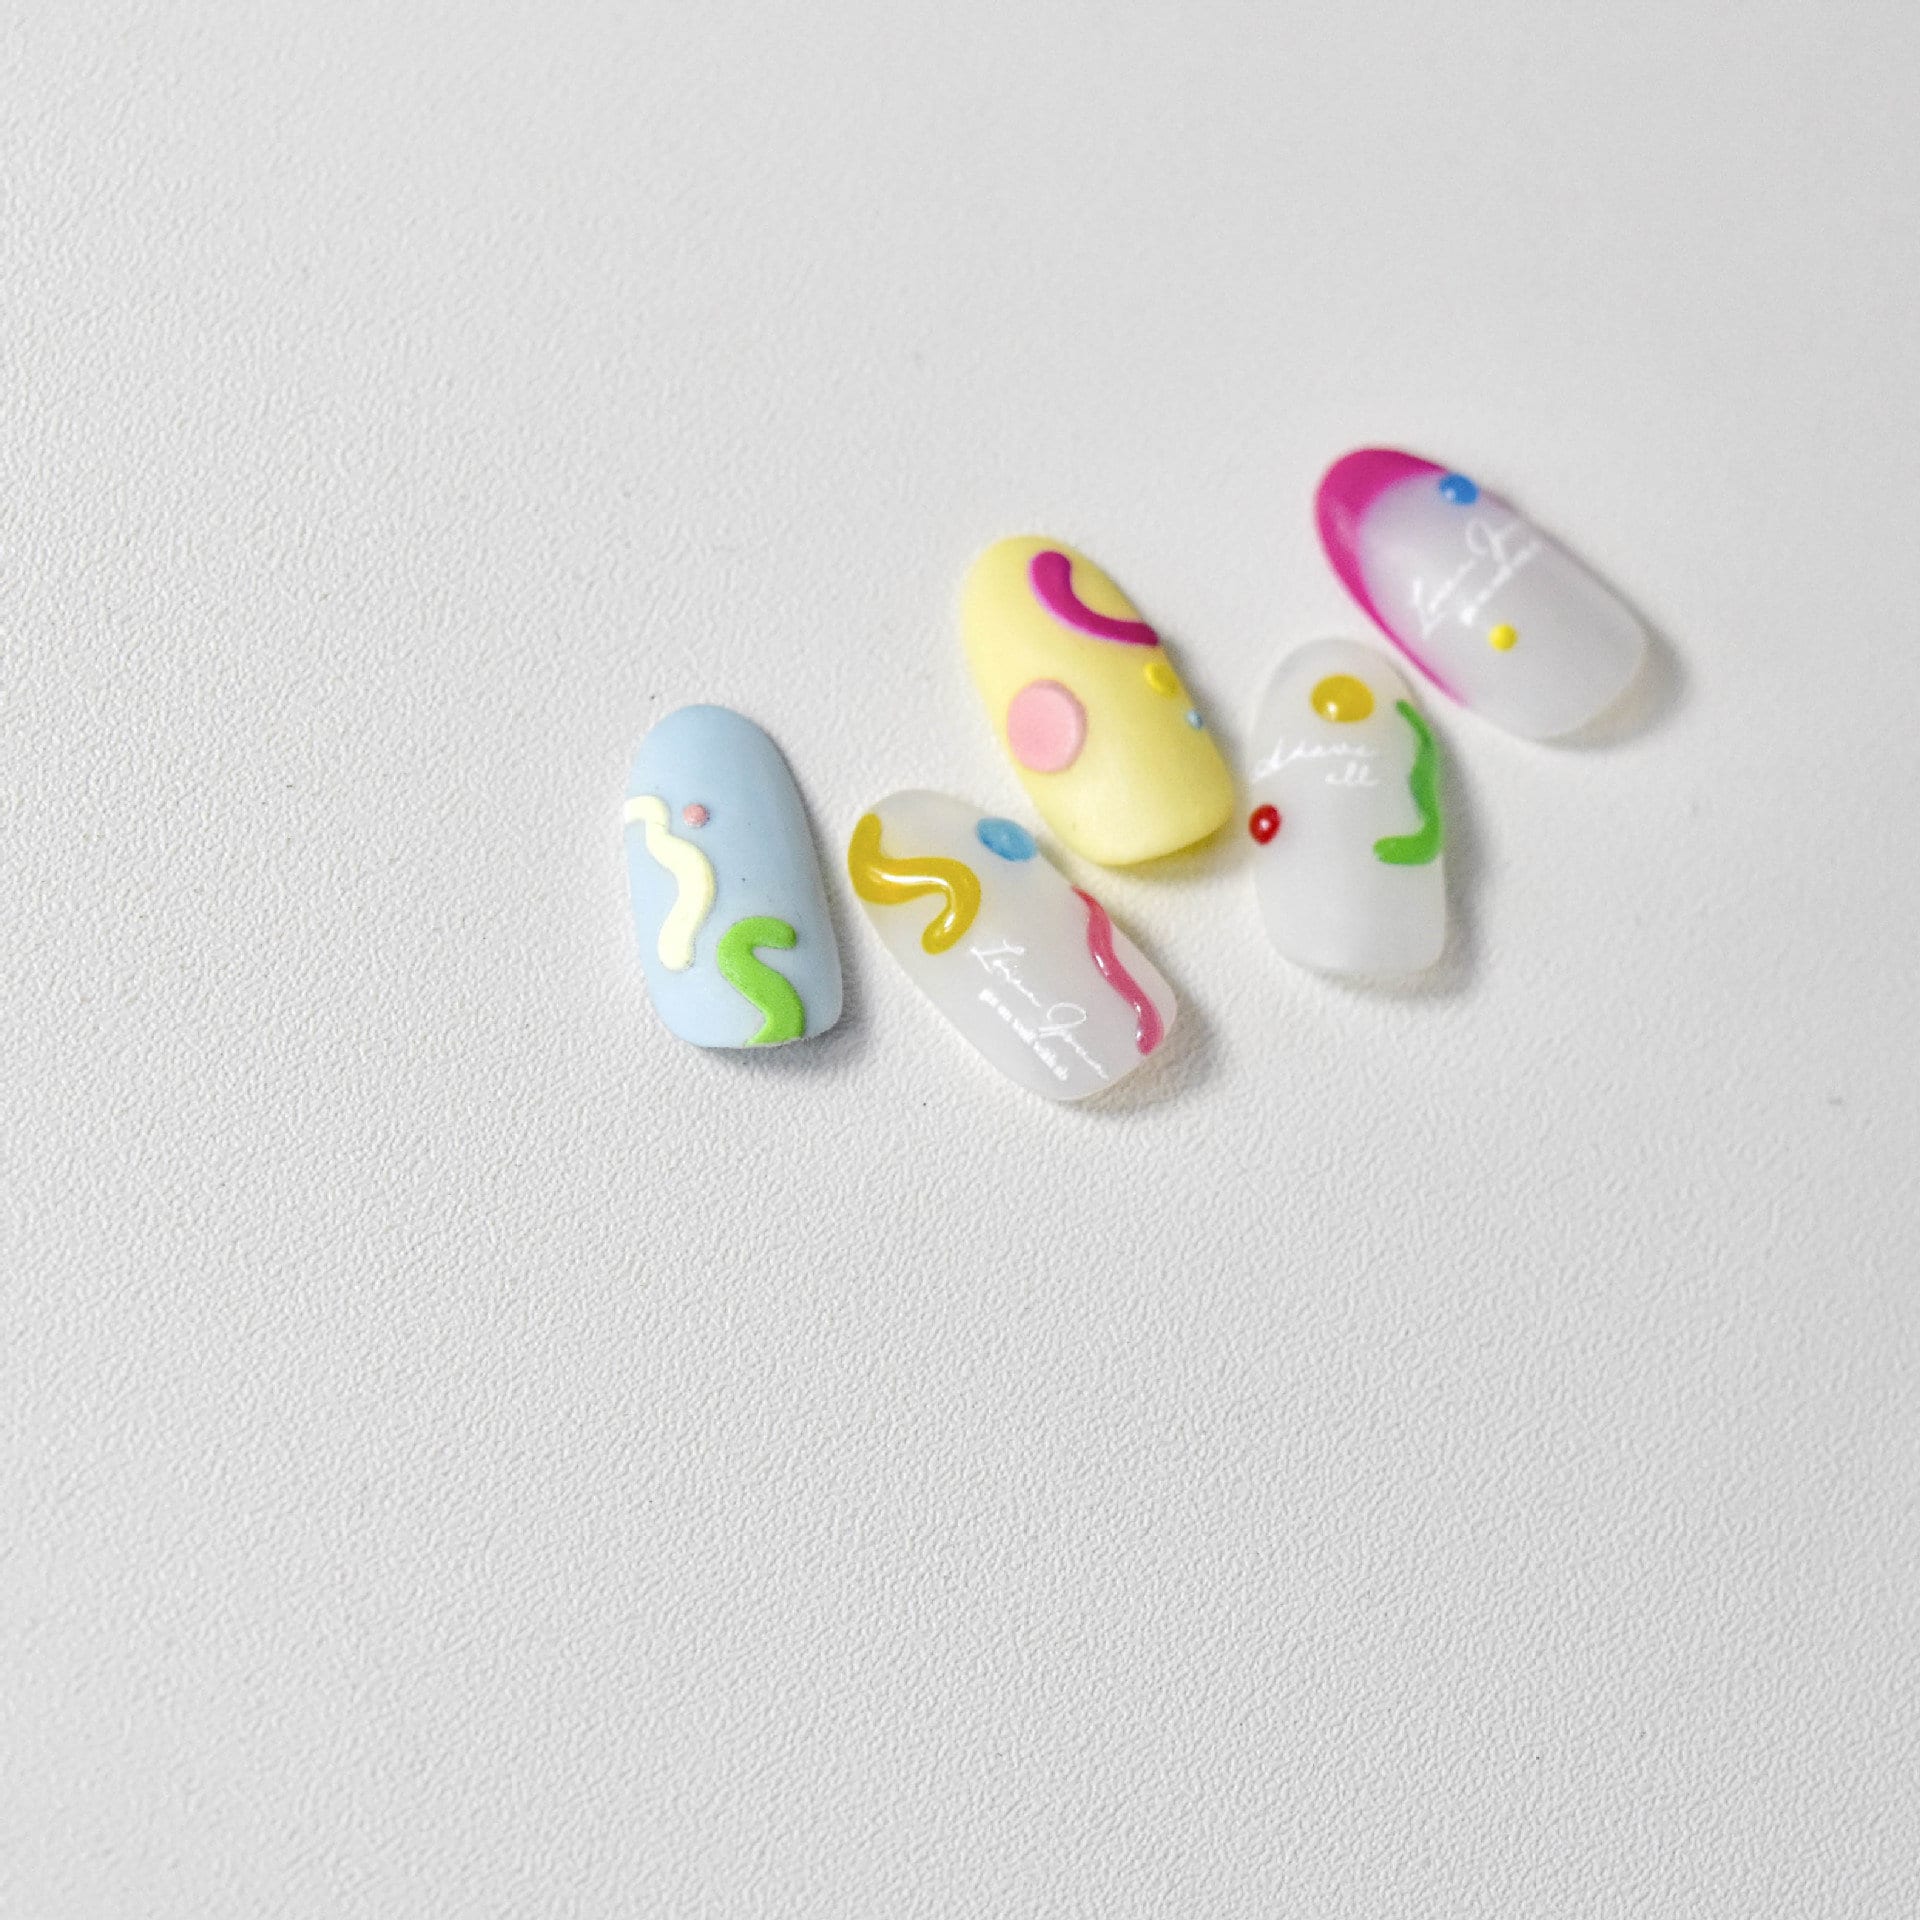 Colorful Button-shaped Chocolates Bean Nails Sticker/ M&M 3D Delightful Doodles Peel off Stickers/ Summer Sweetness Nail Decals